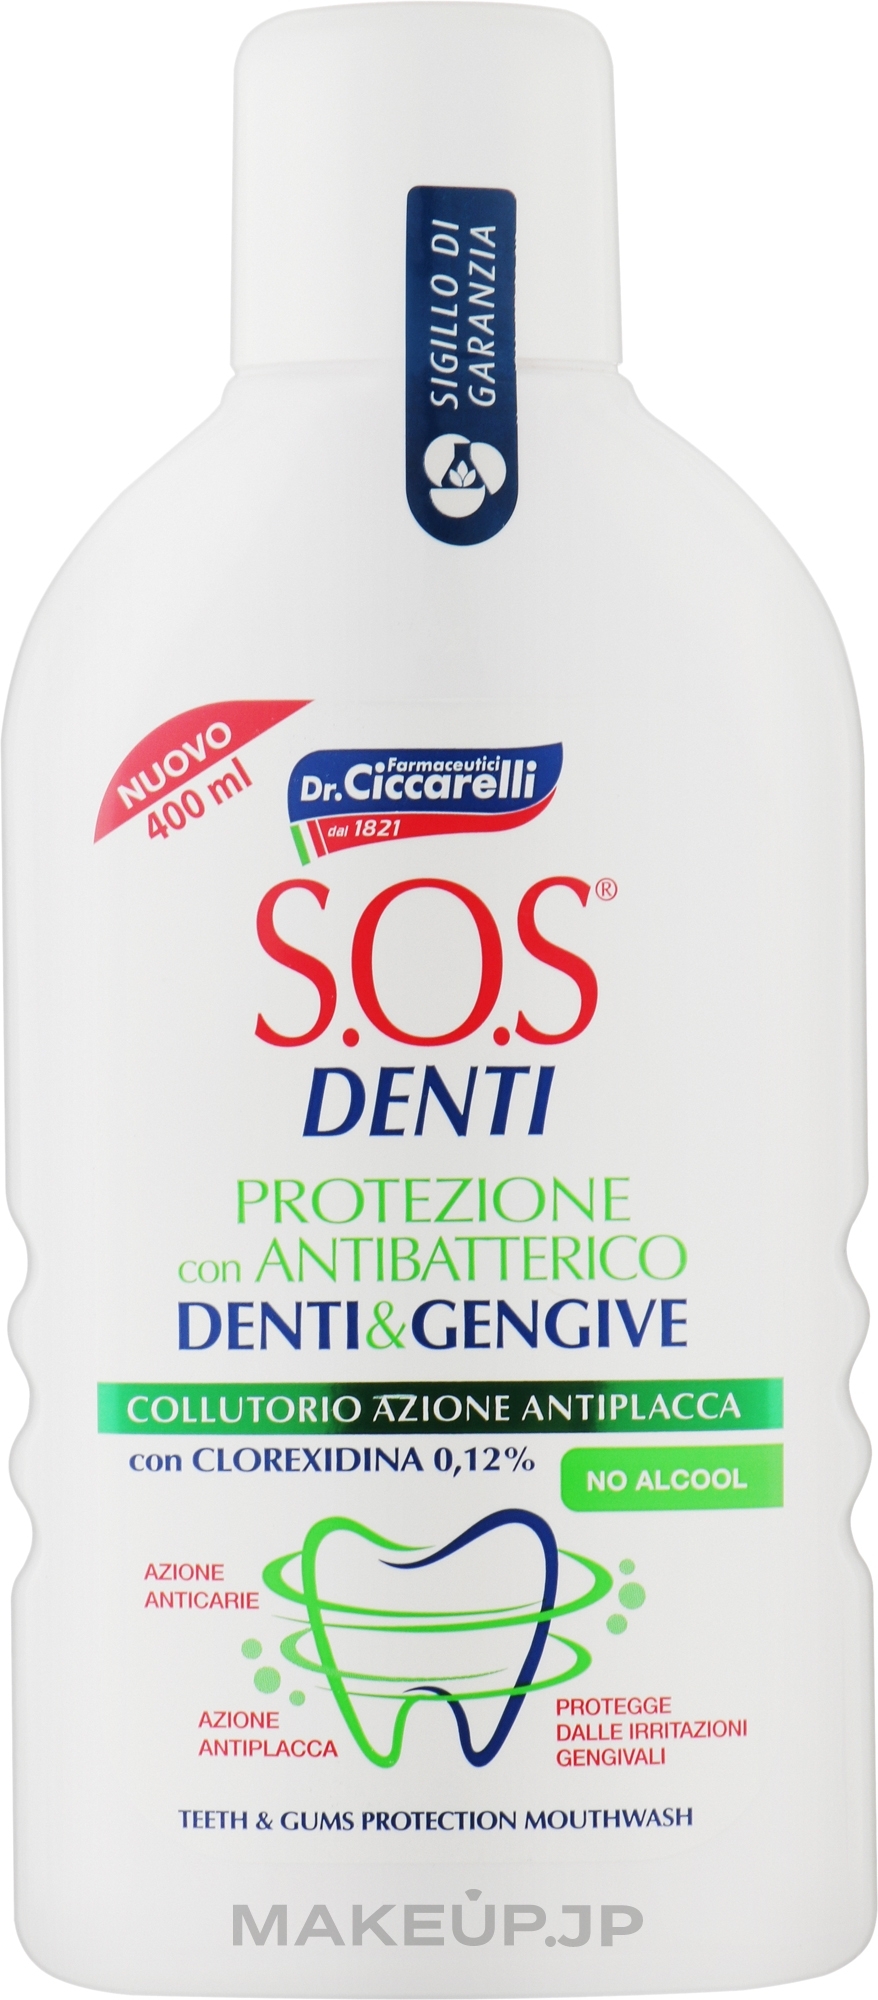 Chlorhexidine Mouthwash - Dr. Ciccarelli S.O.S Denti Teeth and Gums Protection Mouthwash — photo 400 ml